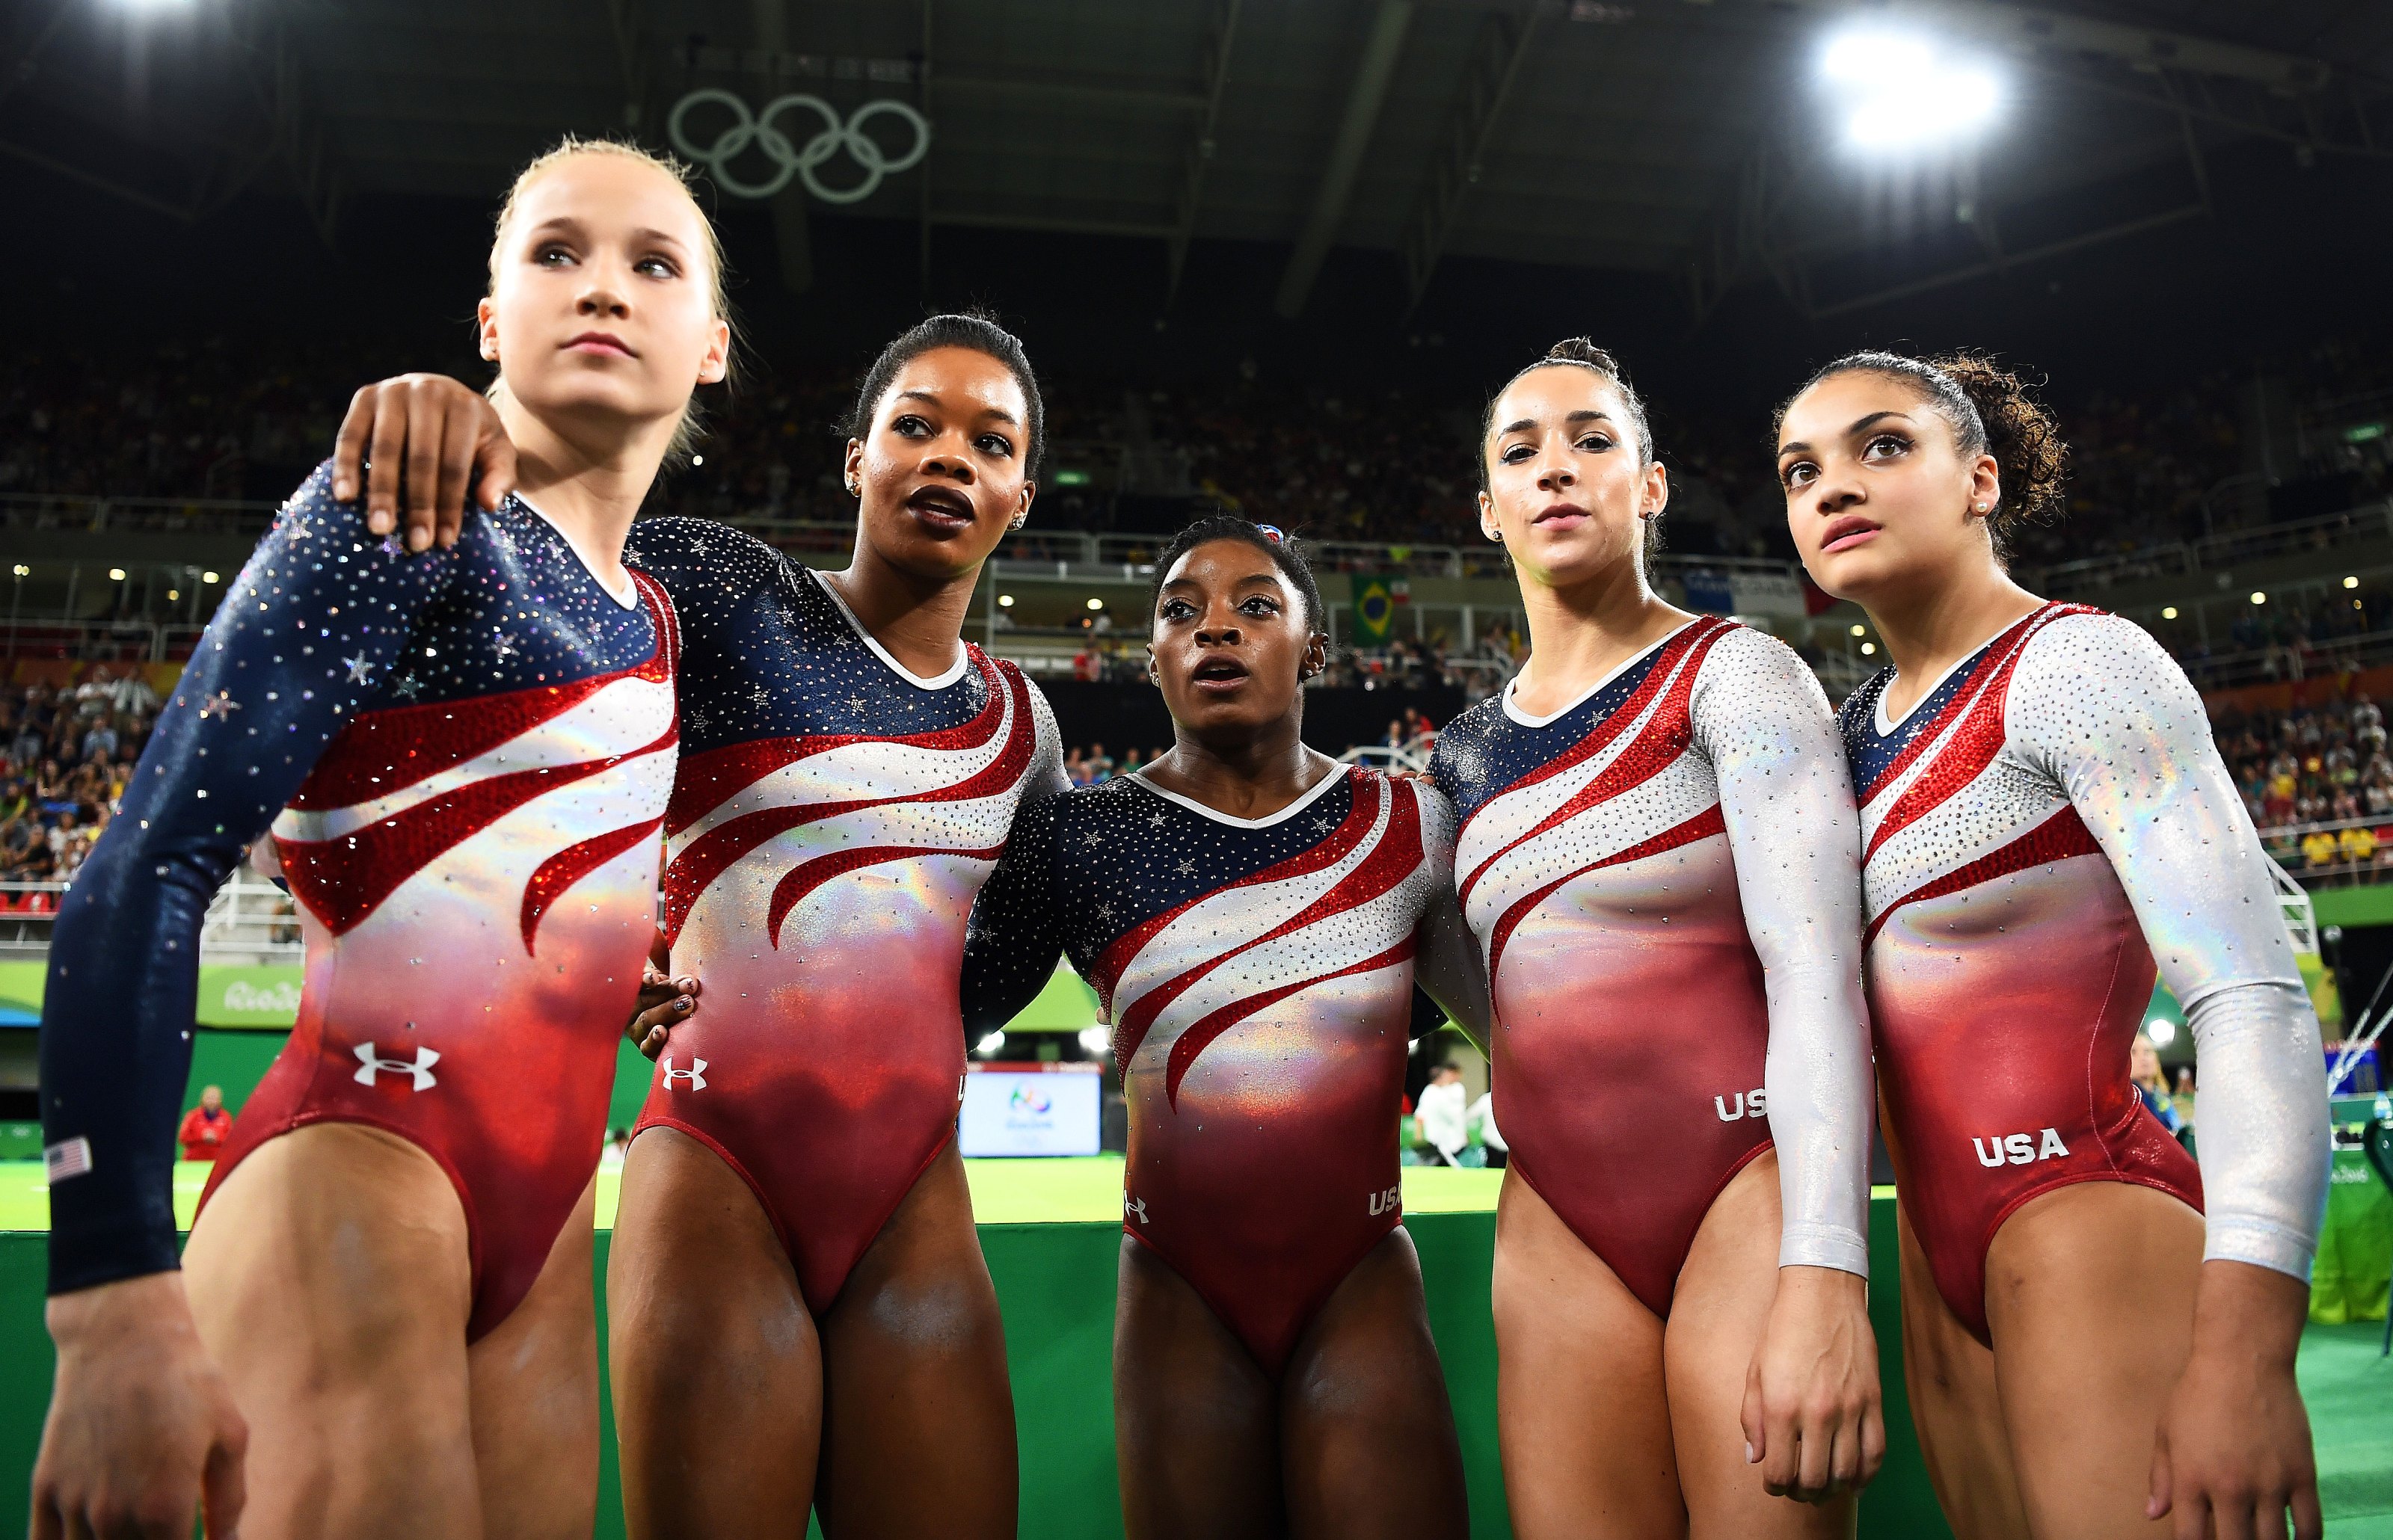 Rio Olympics Leotards Are Worth More Than Gold Medals Usweekly 